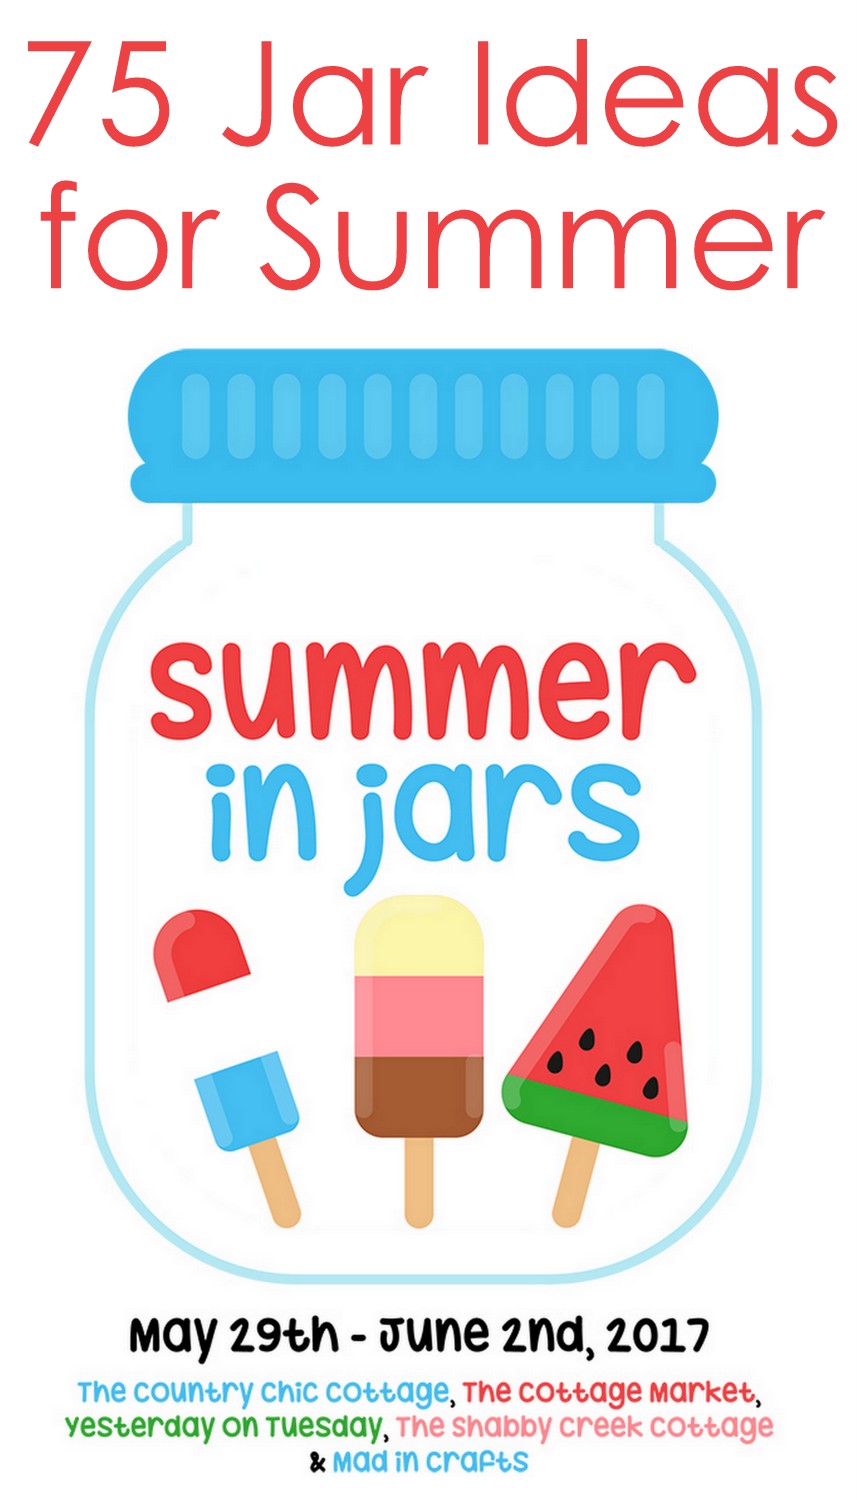 75 DIYs for Summer using Mason Jars - great ideas for crafts with jars!